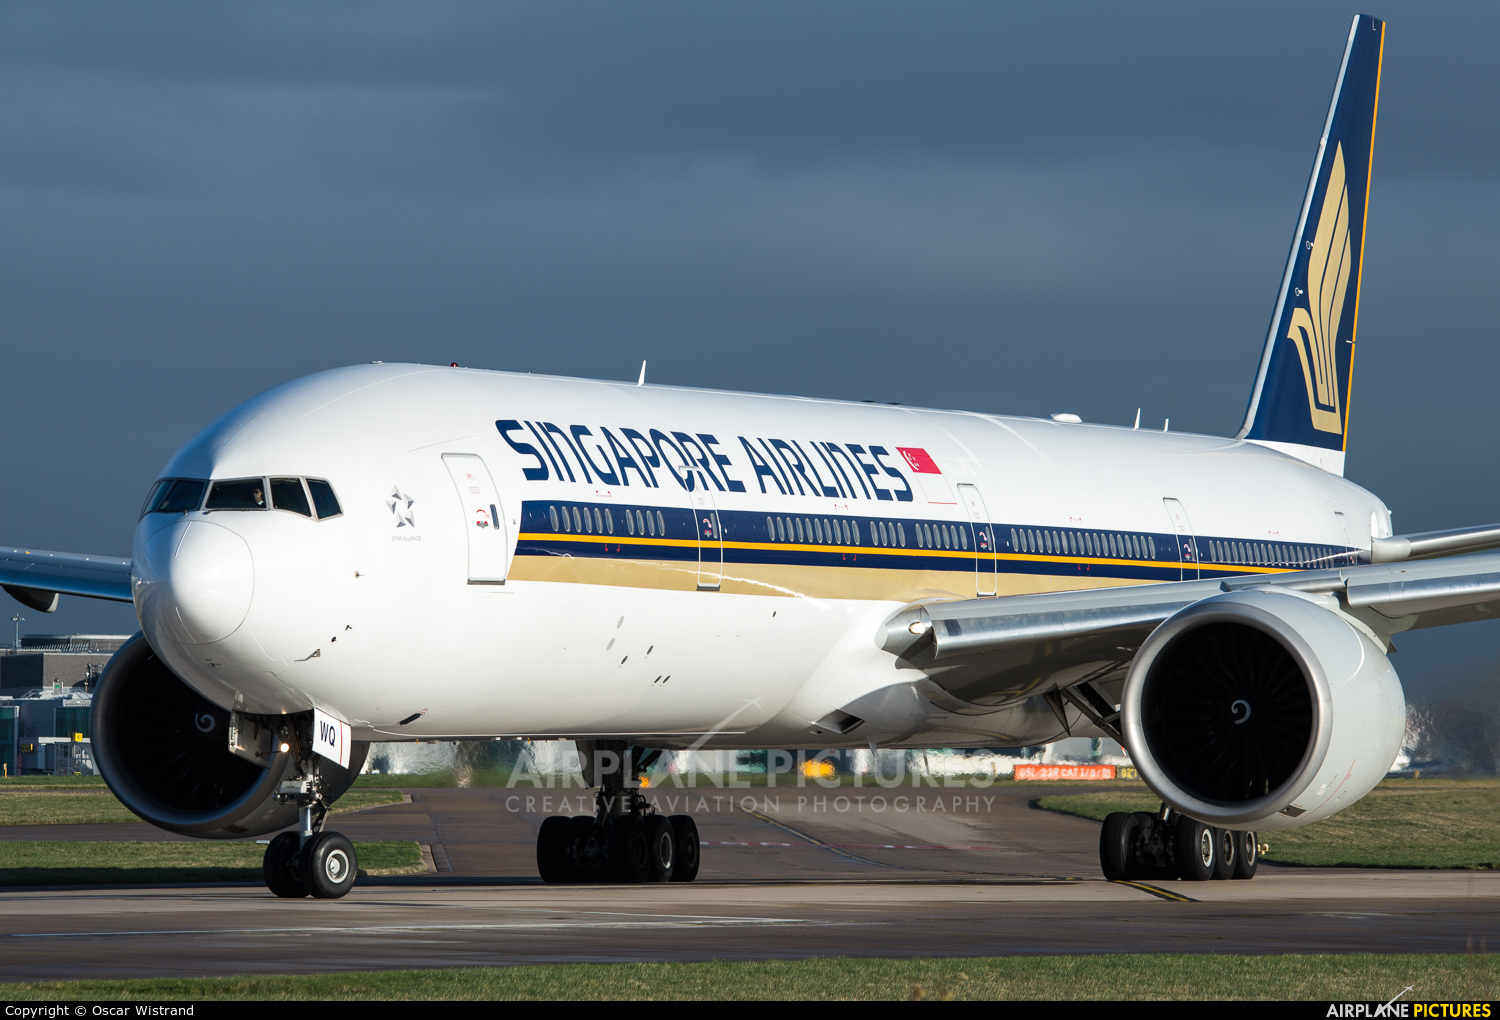 Singapore Airlines 9V-SWQ aircraft at Manchester